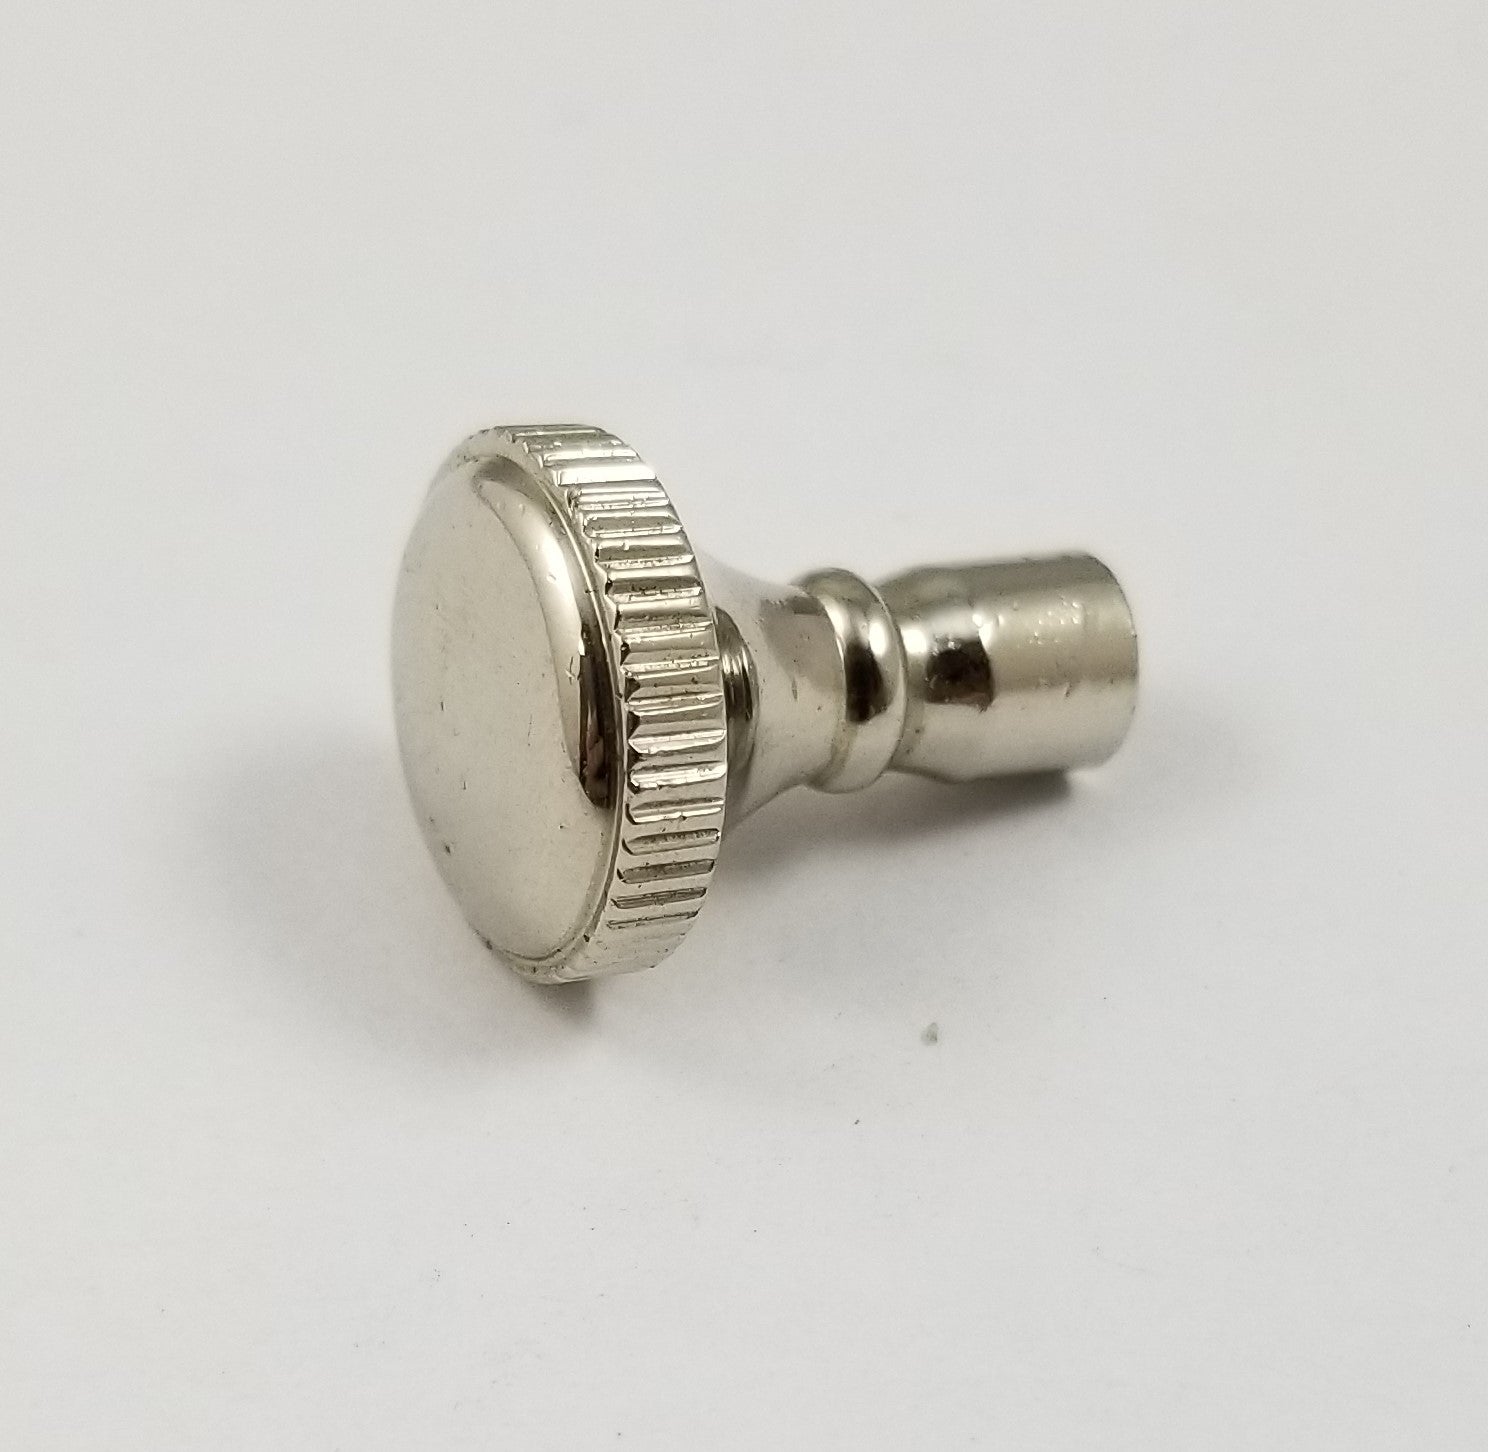 Solid Brass Chrome Plated Knob with a 4/36" Threading